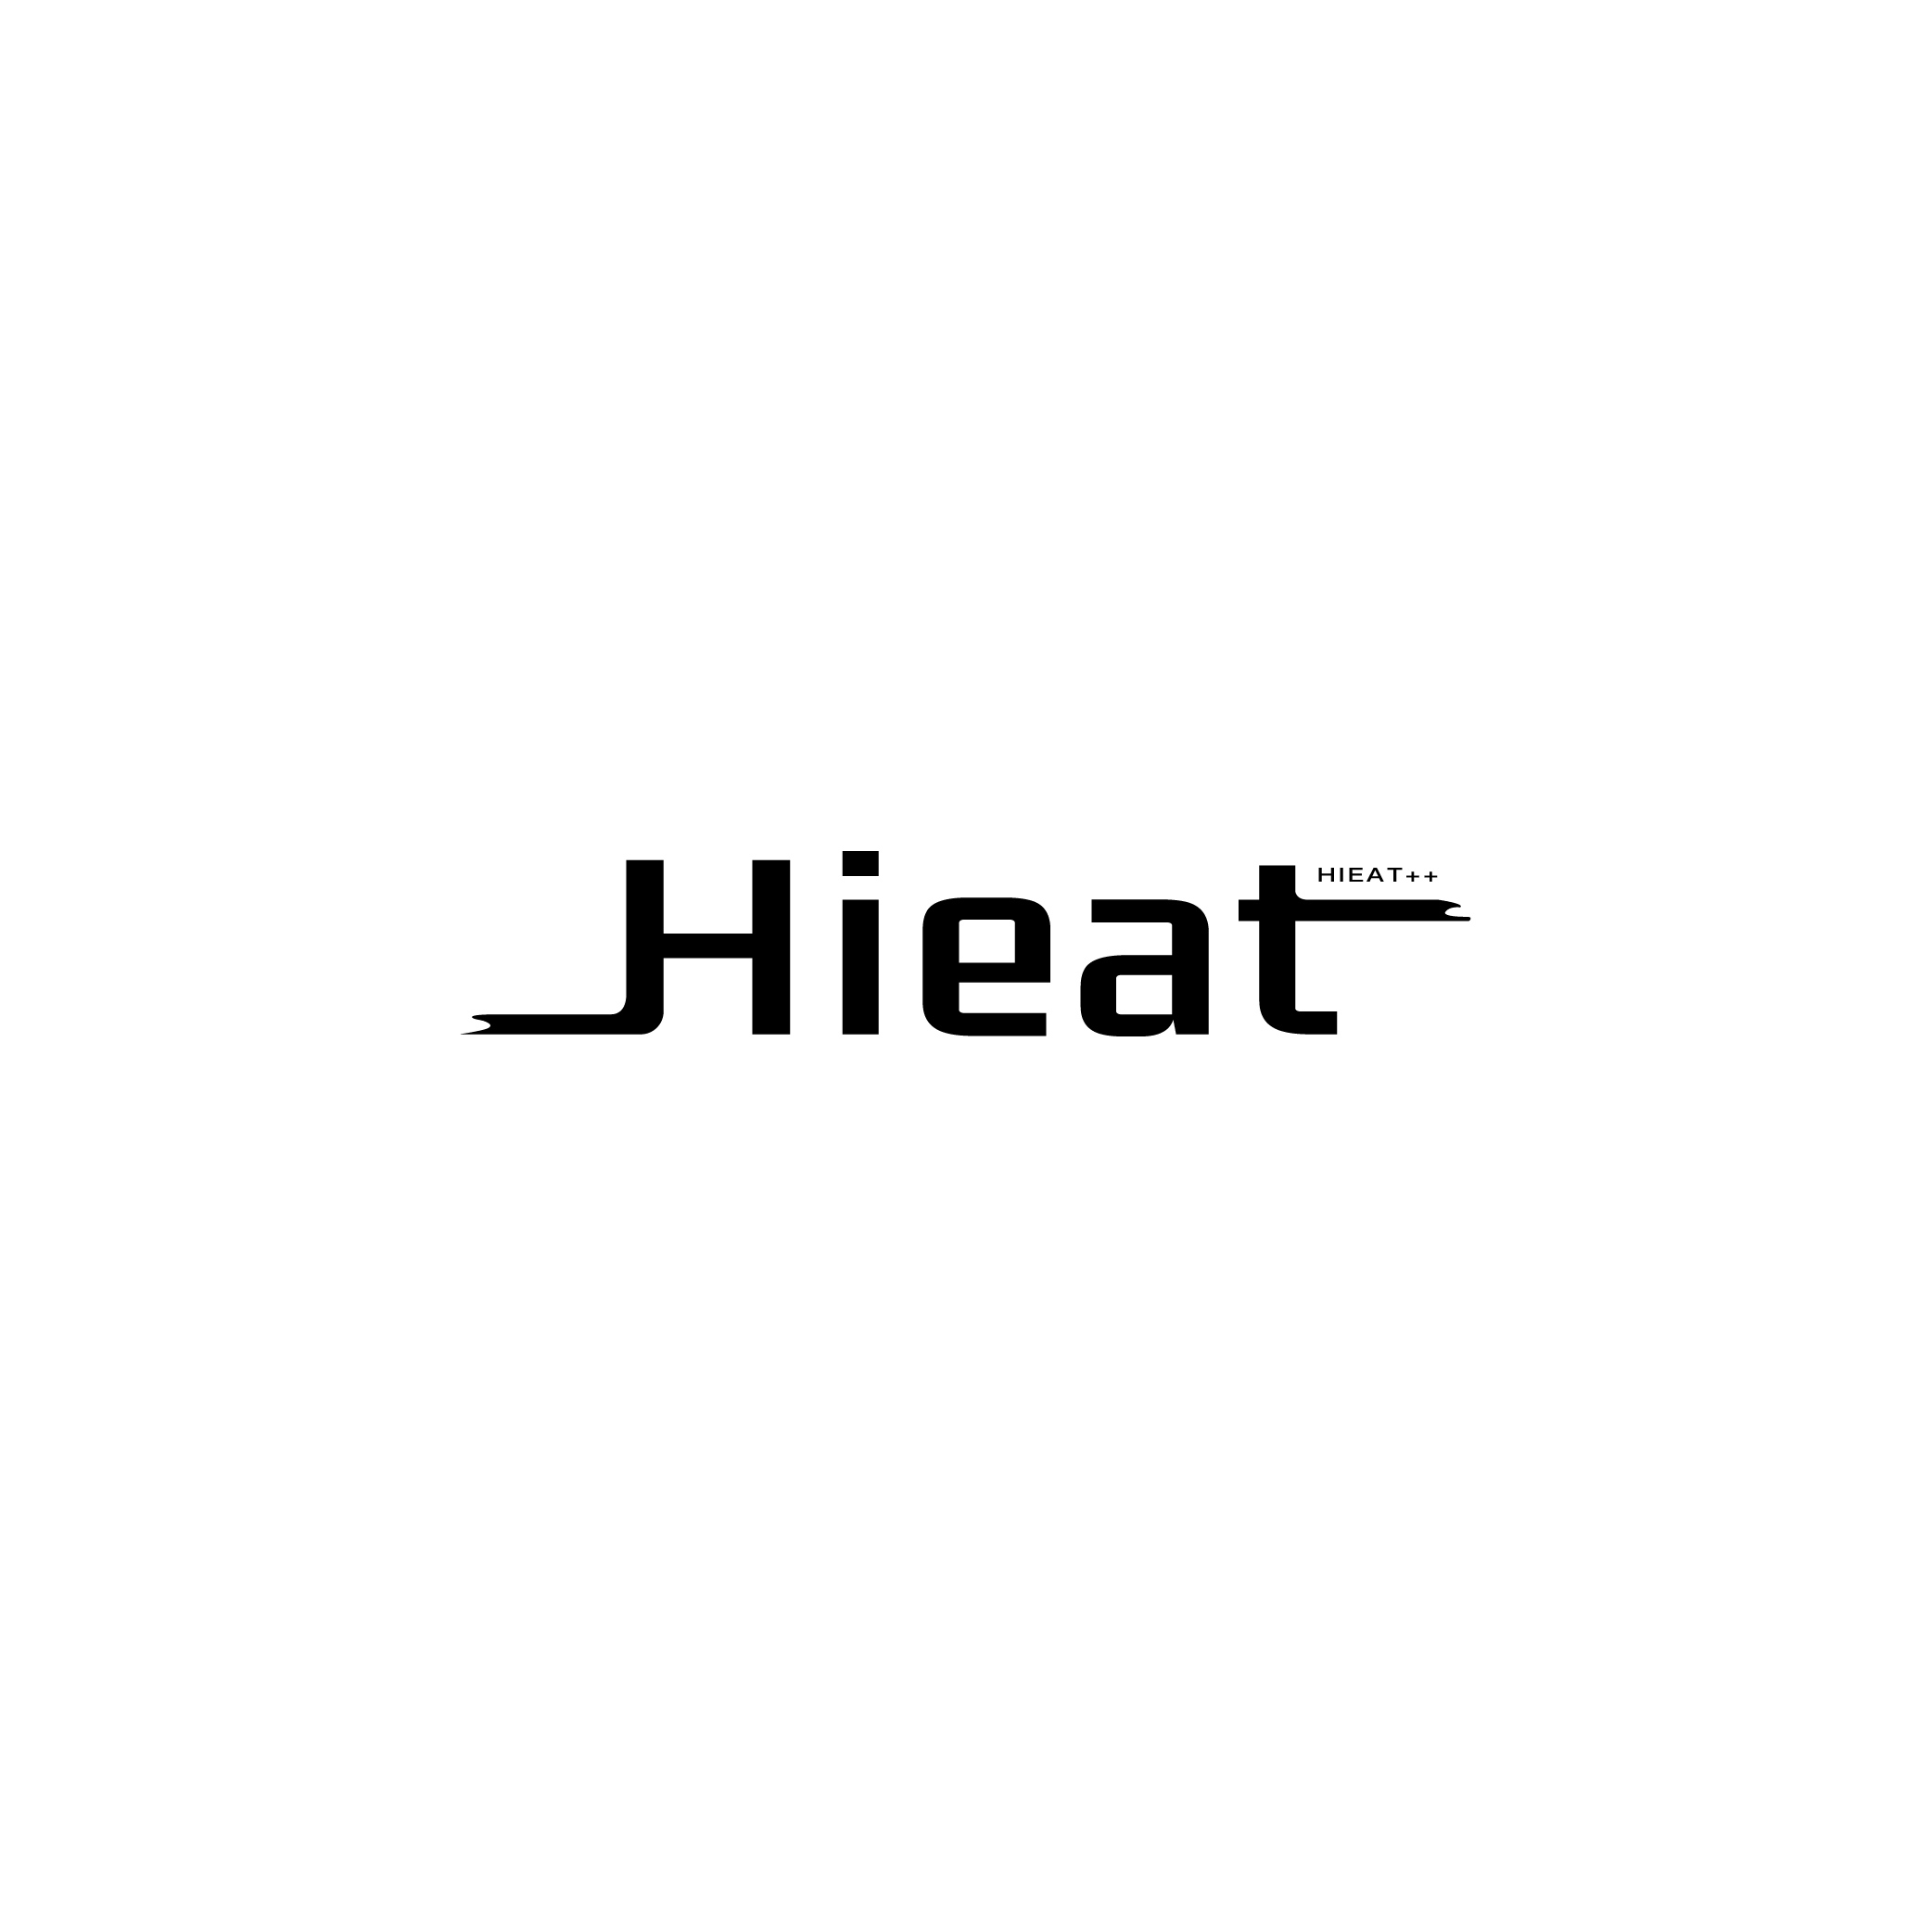 hieat